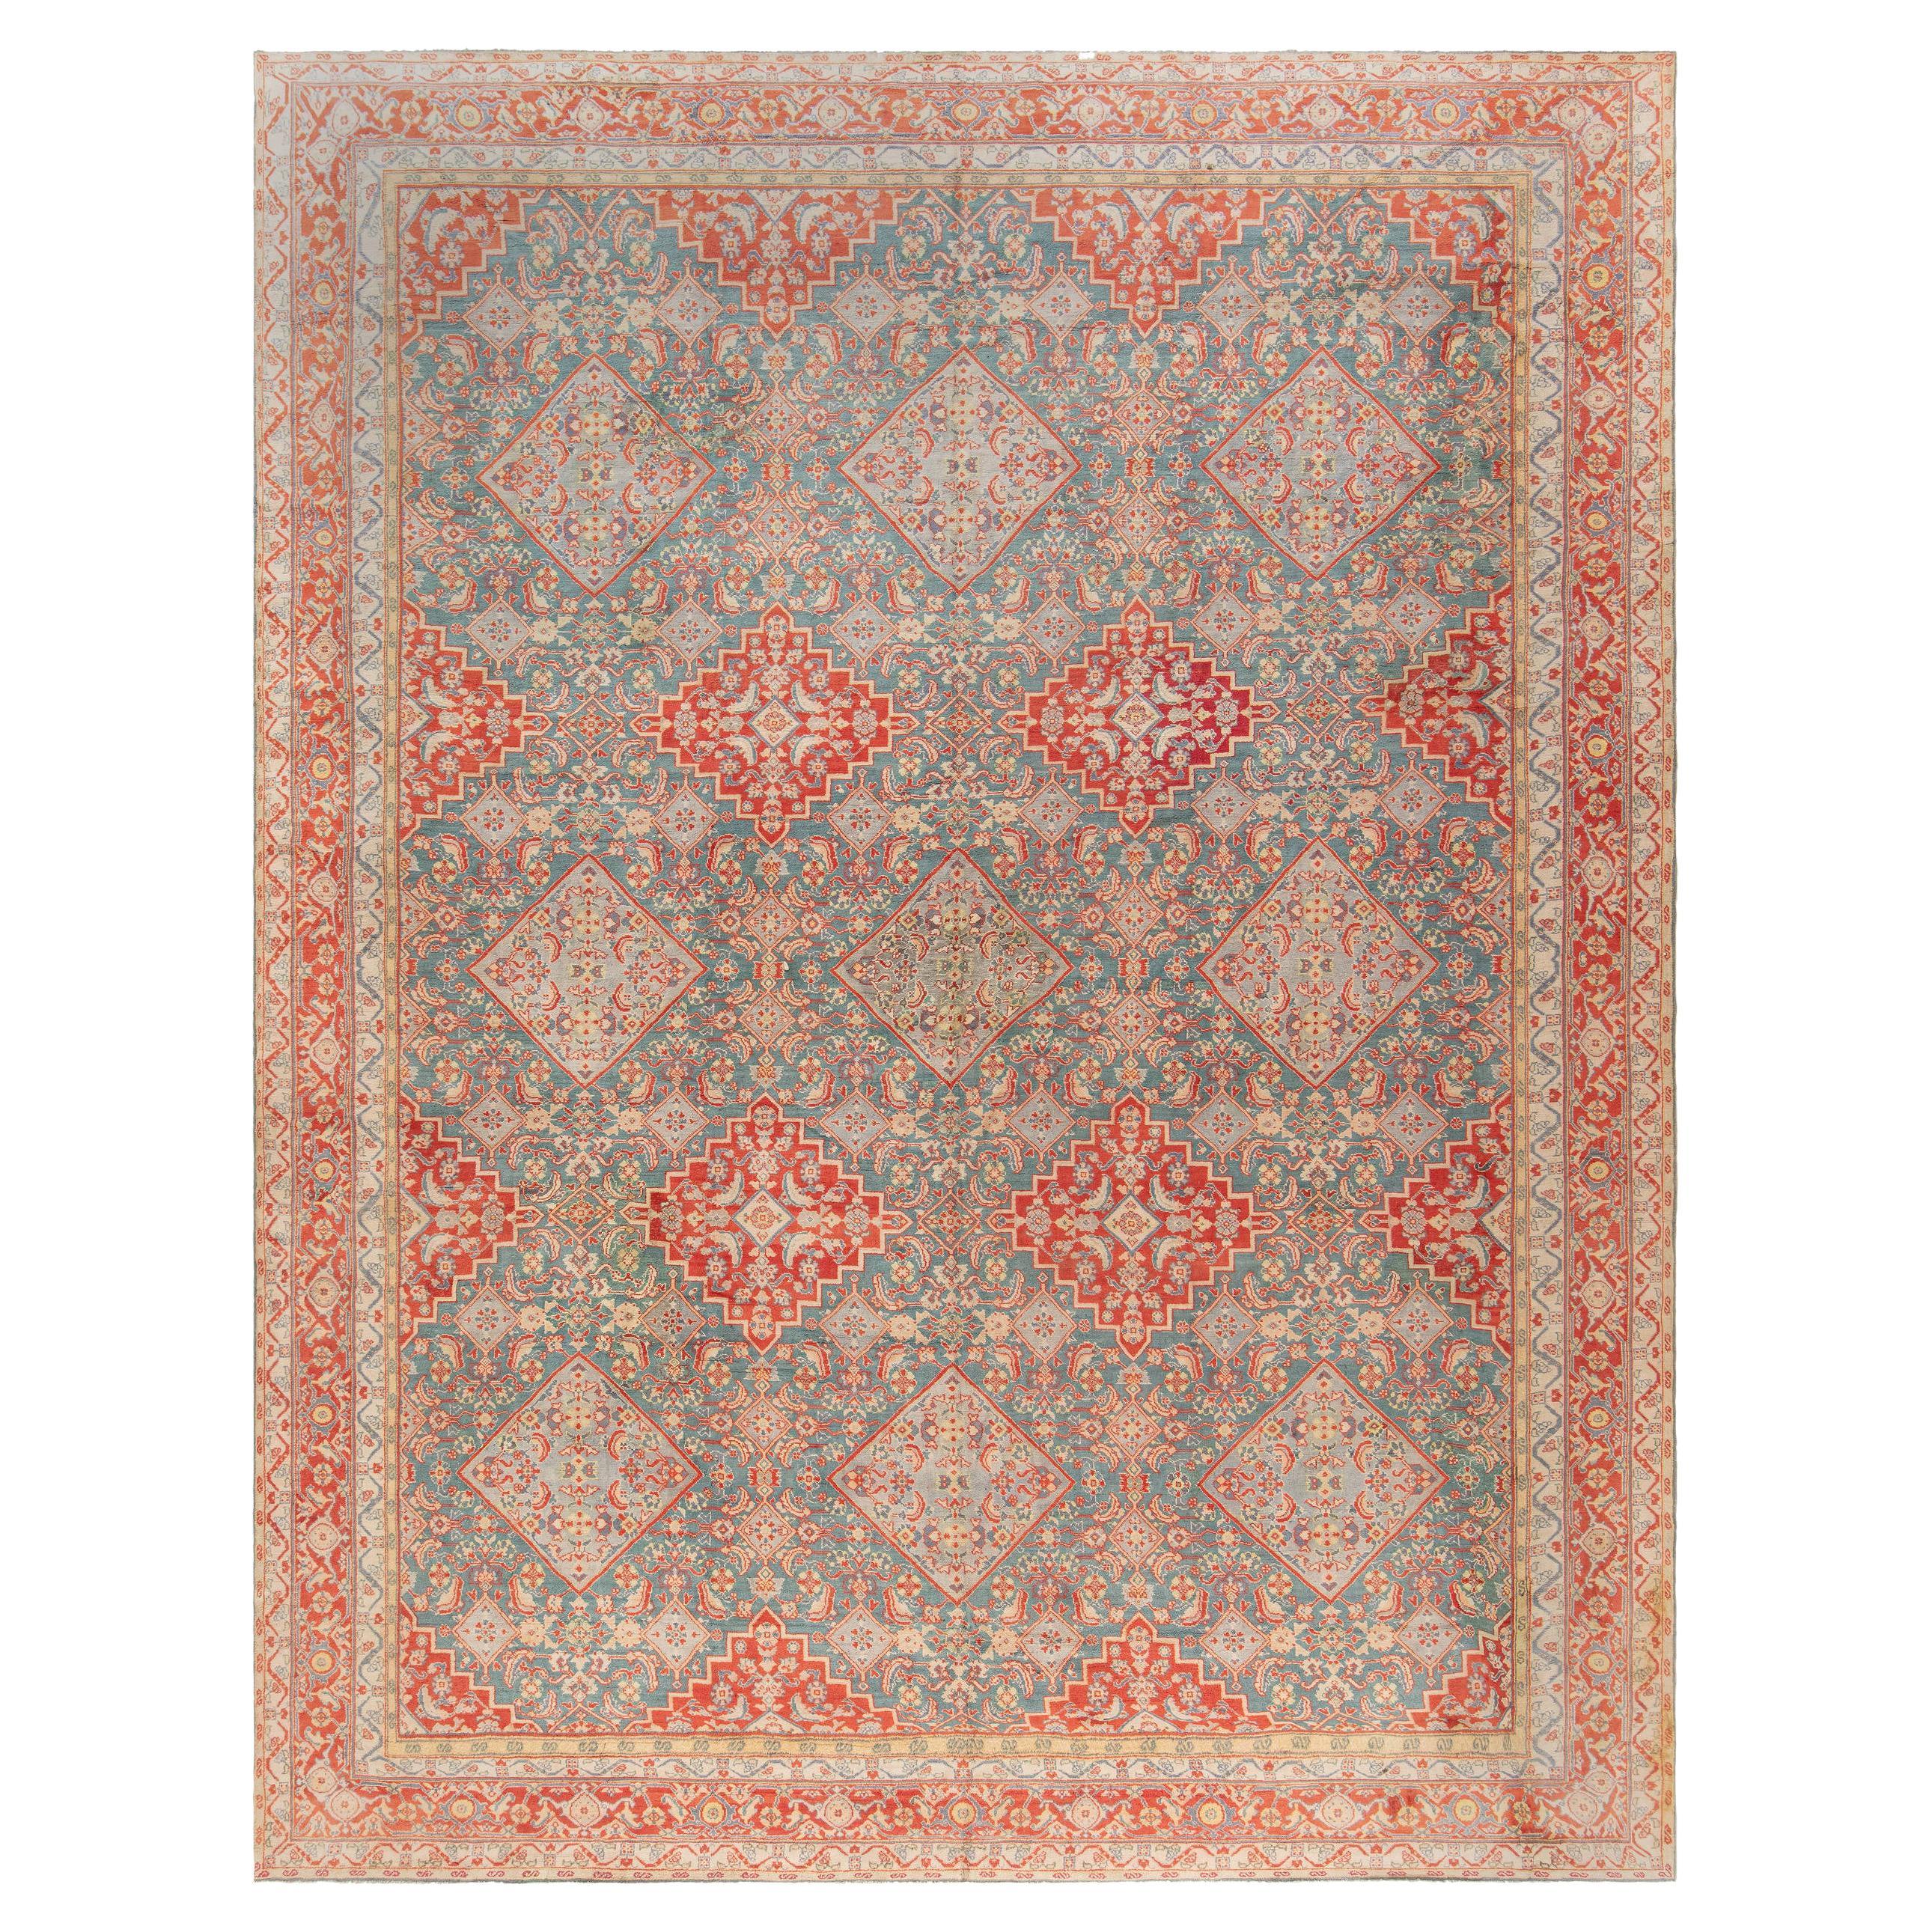 Antique Indian Agra Red Blue Handmade Rug For Sale